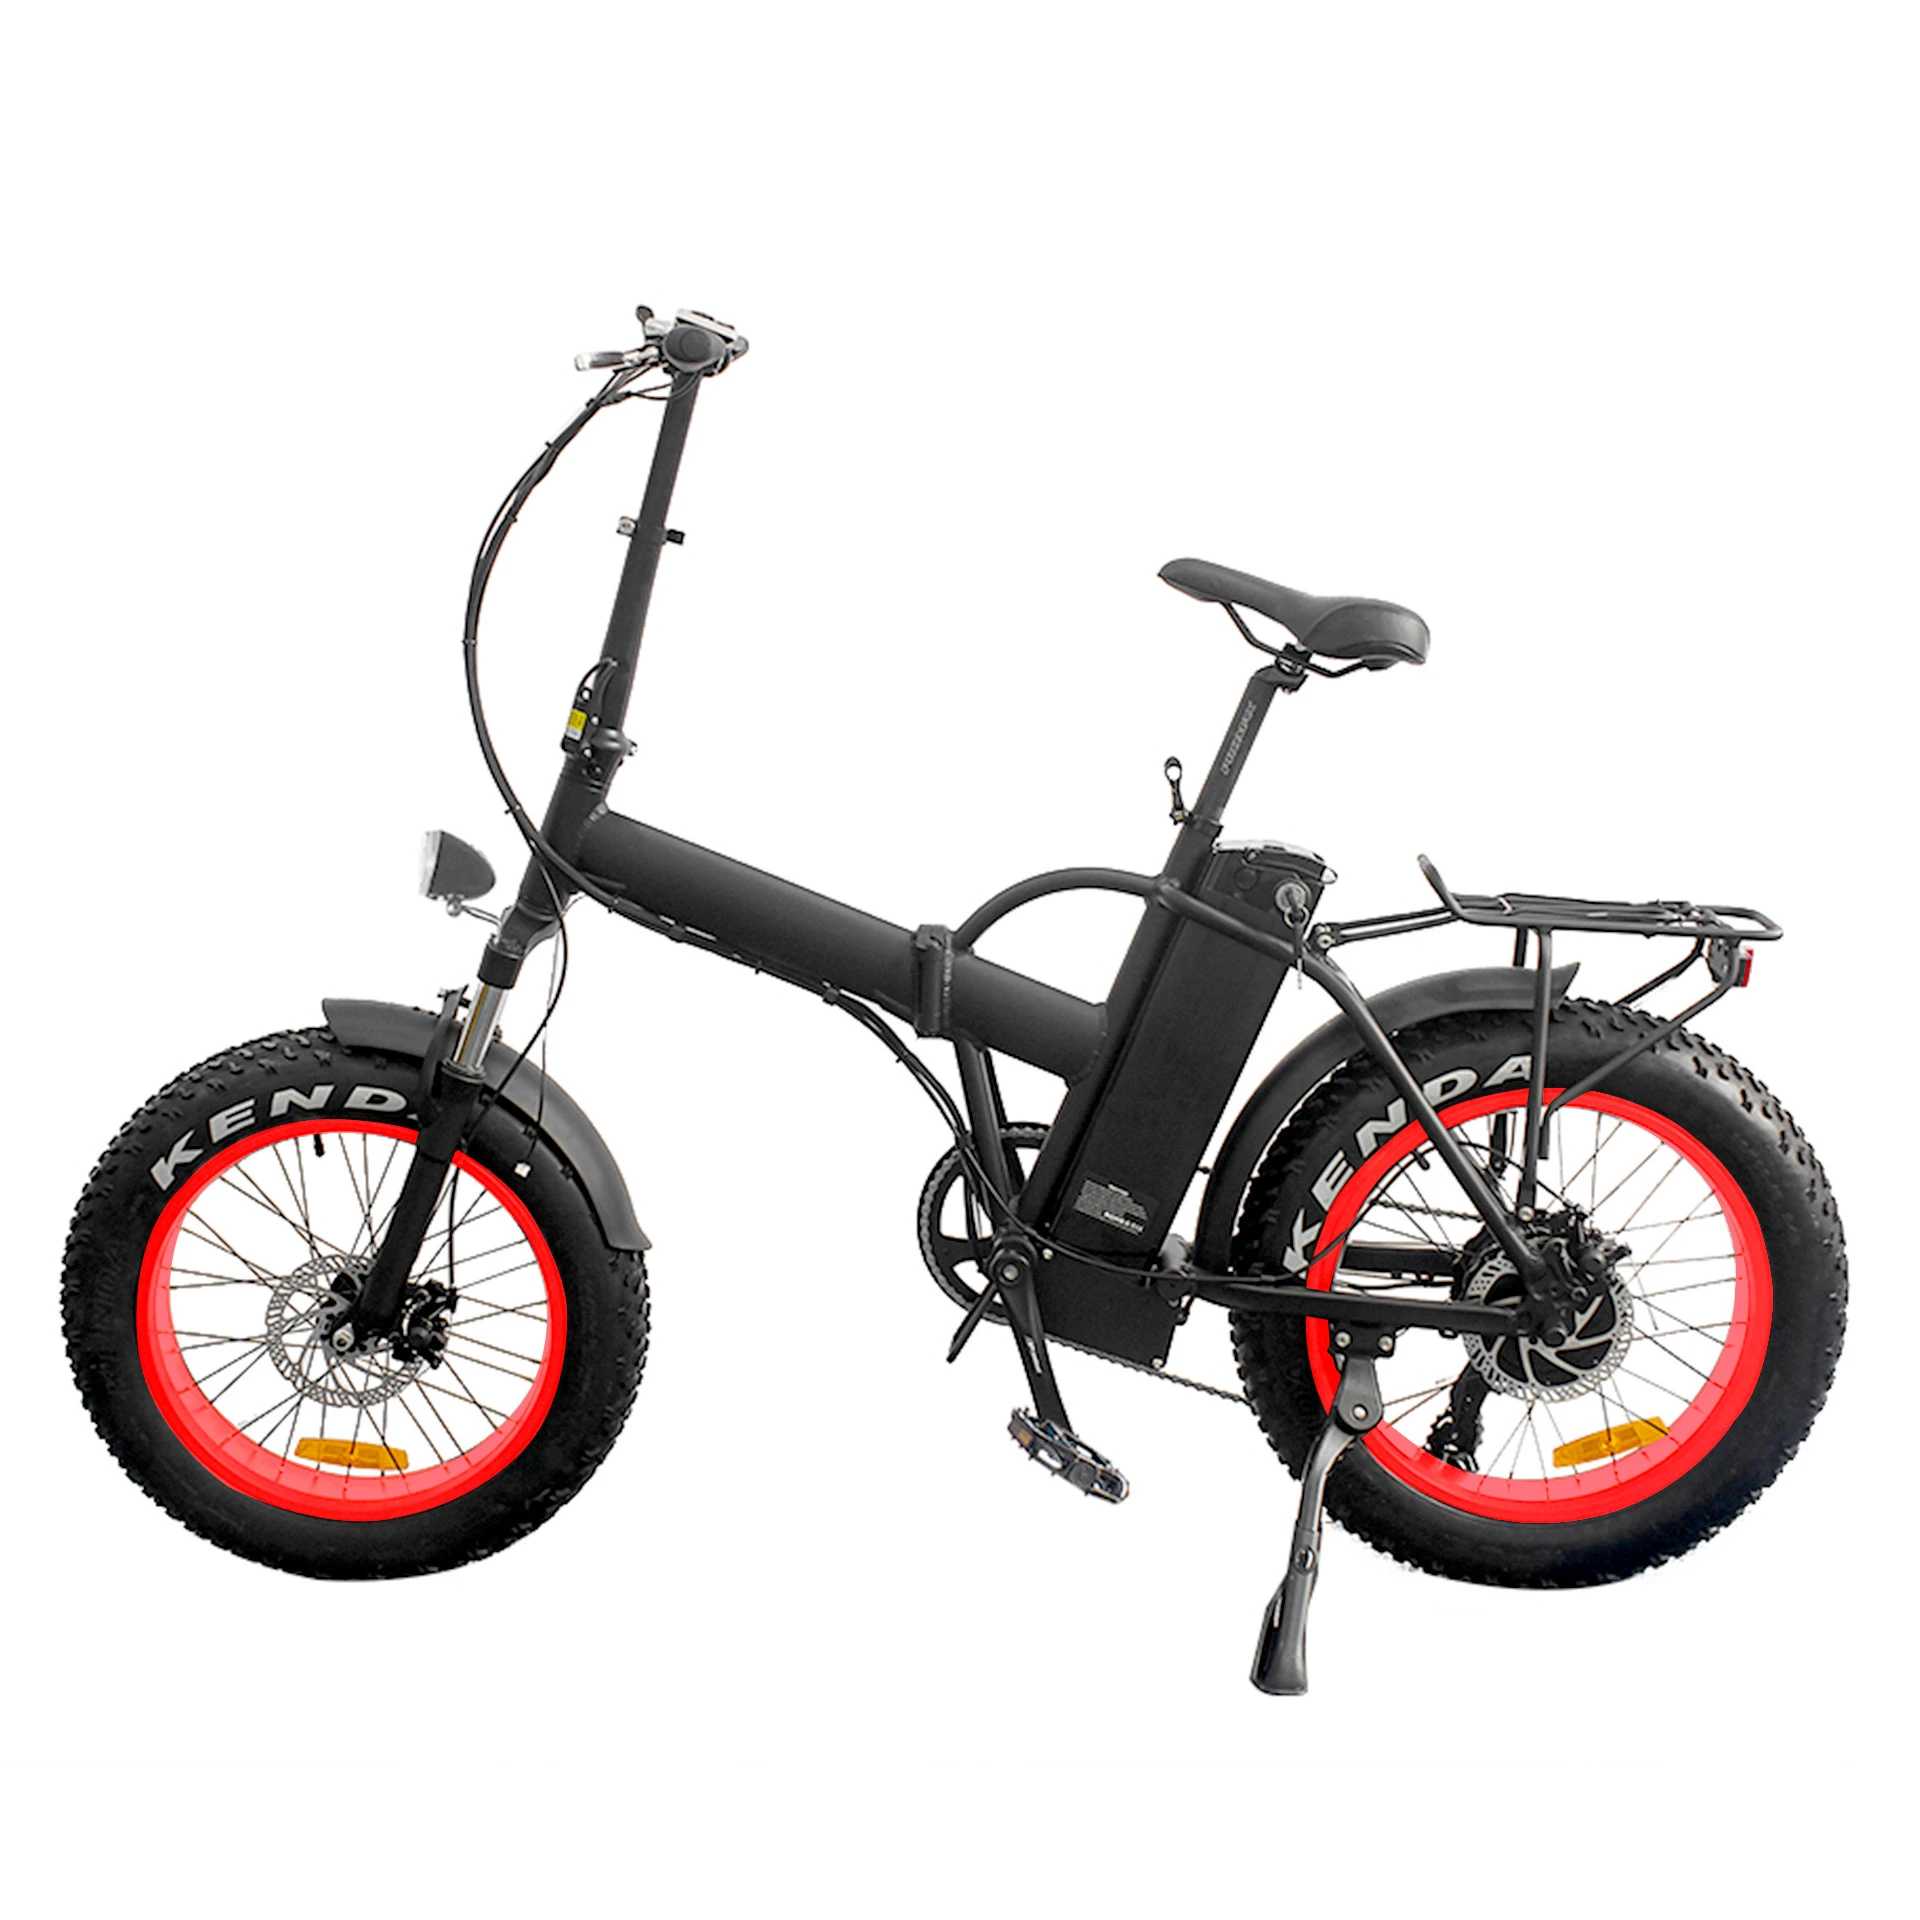 Best quality 48V 750W folding fat tire snow electric bike/bicycle for sale